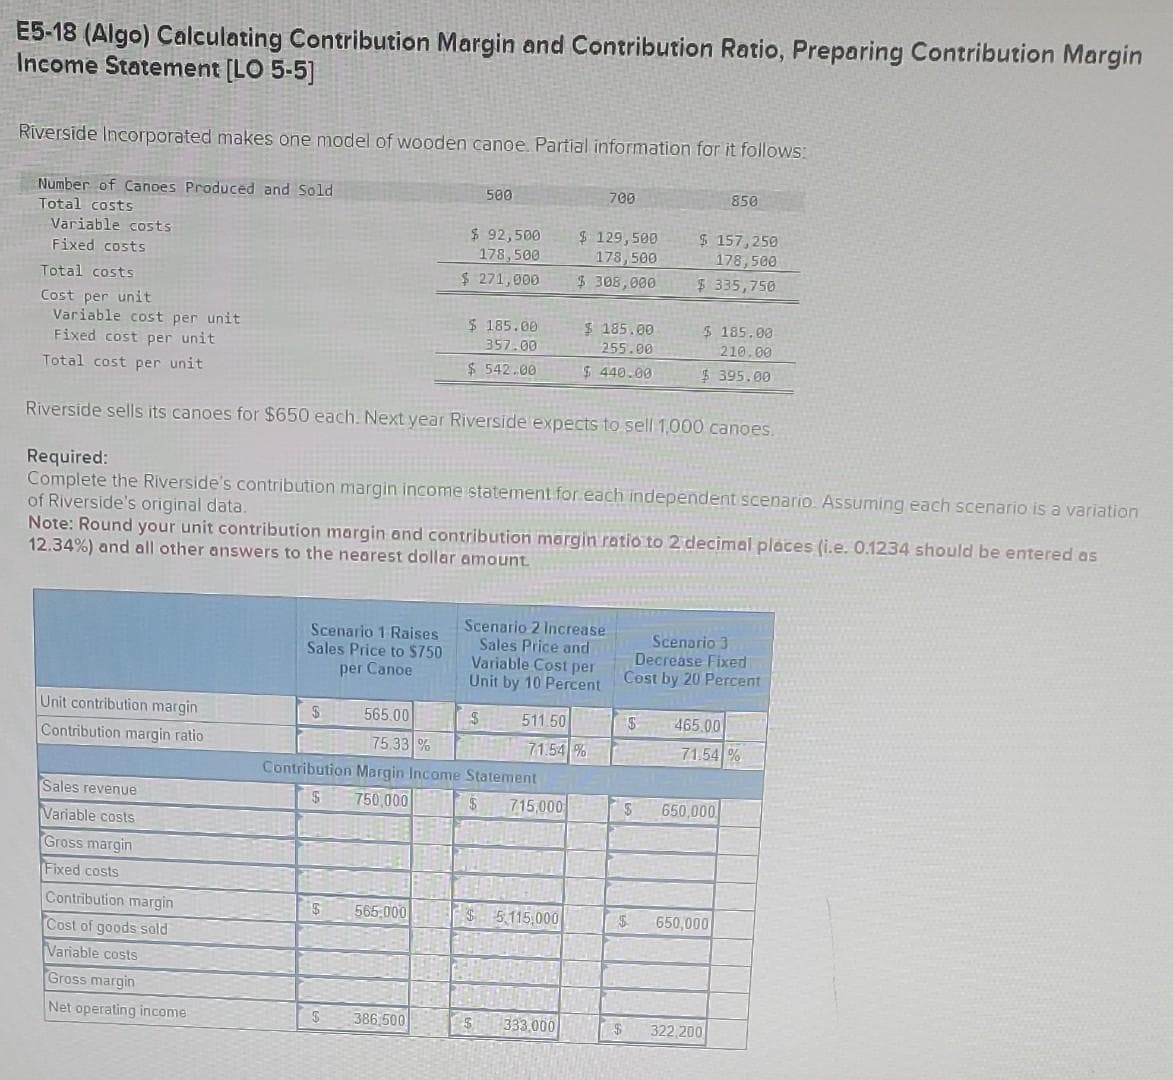 E5-18 (Algo) Calculating Contribution Margin and Contribution Ratio, Preparing Contribution Margin
Income Statement [LO 5-5]
Riverside Incorporated makes one model of wooden canoe. Partial information for it follows:
Number of Canoes Produced and Sold
Total costs
Variable costs
Fixed costs
Total costs
Cost per unit
Variable cost per unit
Fixed cost per unit
Total cost per unit
Unit contribution margin
Contribution margin ratio
Sales revenue
Variable costs
Gross margin
Fixed costs
Contribution margin
Cost of goods sold
Variable costs
Gross margin
Net operating income
Scenario 1 Raises
Sales Price to $750
per Canoe
$
565.00
75,33 %
$
500
Riverside sells its canoes for $650 each. Next year Riverside expects to sell 1,000 canoes.
$ 92,500
178,500
$ 271,000
Required:
Complete the Riverside's contribution margin income statement for each independent scenario. Assuming each scenario is a variation
of Riverside's original data.
Note: Round your unit contribution margin and contribution margin ratio to 2 decimal places (i.e. 0.1234 should be entered as
12.34%) and all other answers to the nearest dollar amount.
565,000
$185.00
357.00
$ 542.00
$ 386,500
Contribution Margin Income Statement
750,000
$
Scenario 2 Increase
Sales Price and
Variable Cost per
Unit by 10 Percent
$
$ 129,500
178,500
$308,000
511.50
71.54%
715,000
700
$185.00
255.00
$ 440.00
$5,115,000
$ 333,000
$ 157,250
178,500
$ 335,750
$185.00
210.00
$395.00
$
850
Scenario 3
Decrease Fixed
Cost by 20 Percent
465.00
71.54 %
$ 650,000
$ 650,000
$ 322,200